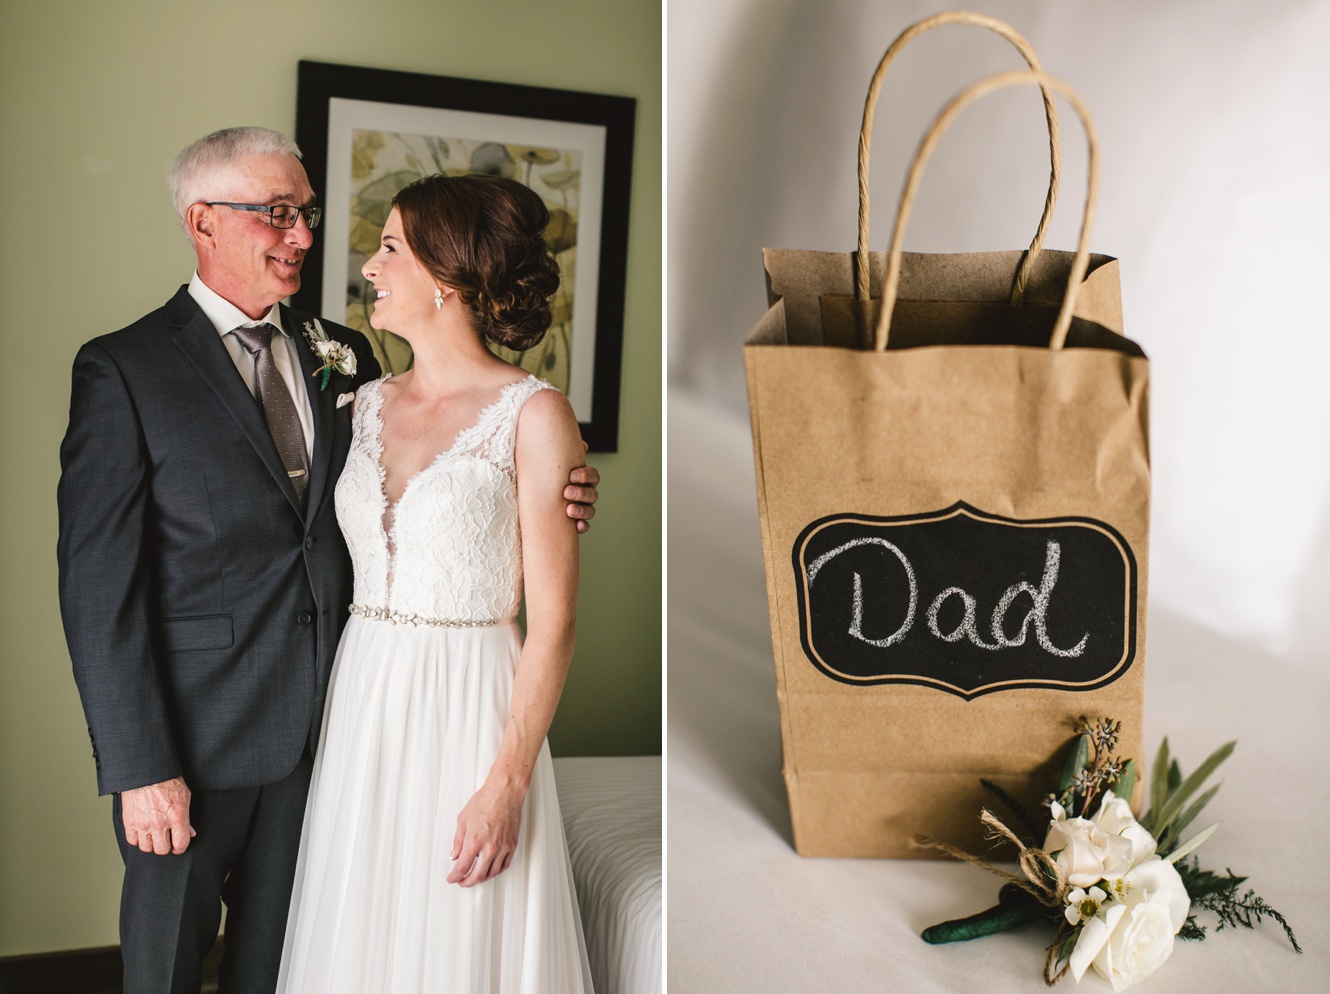 Gifting ideas for your wedding day photo